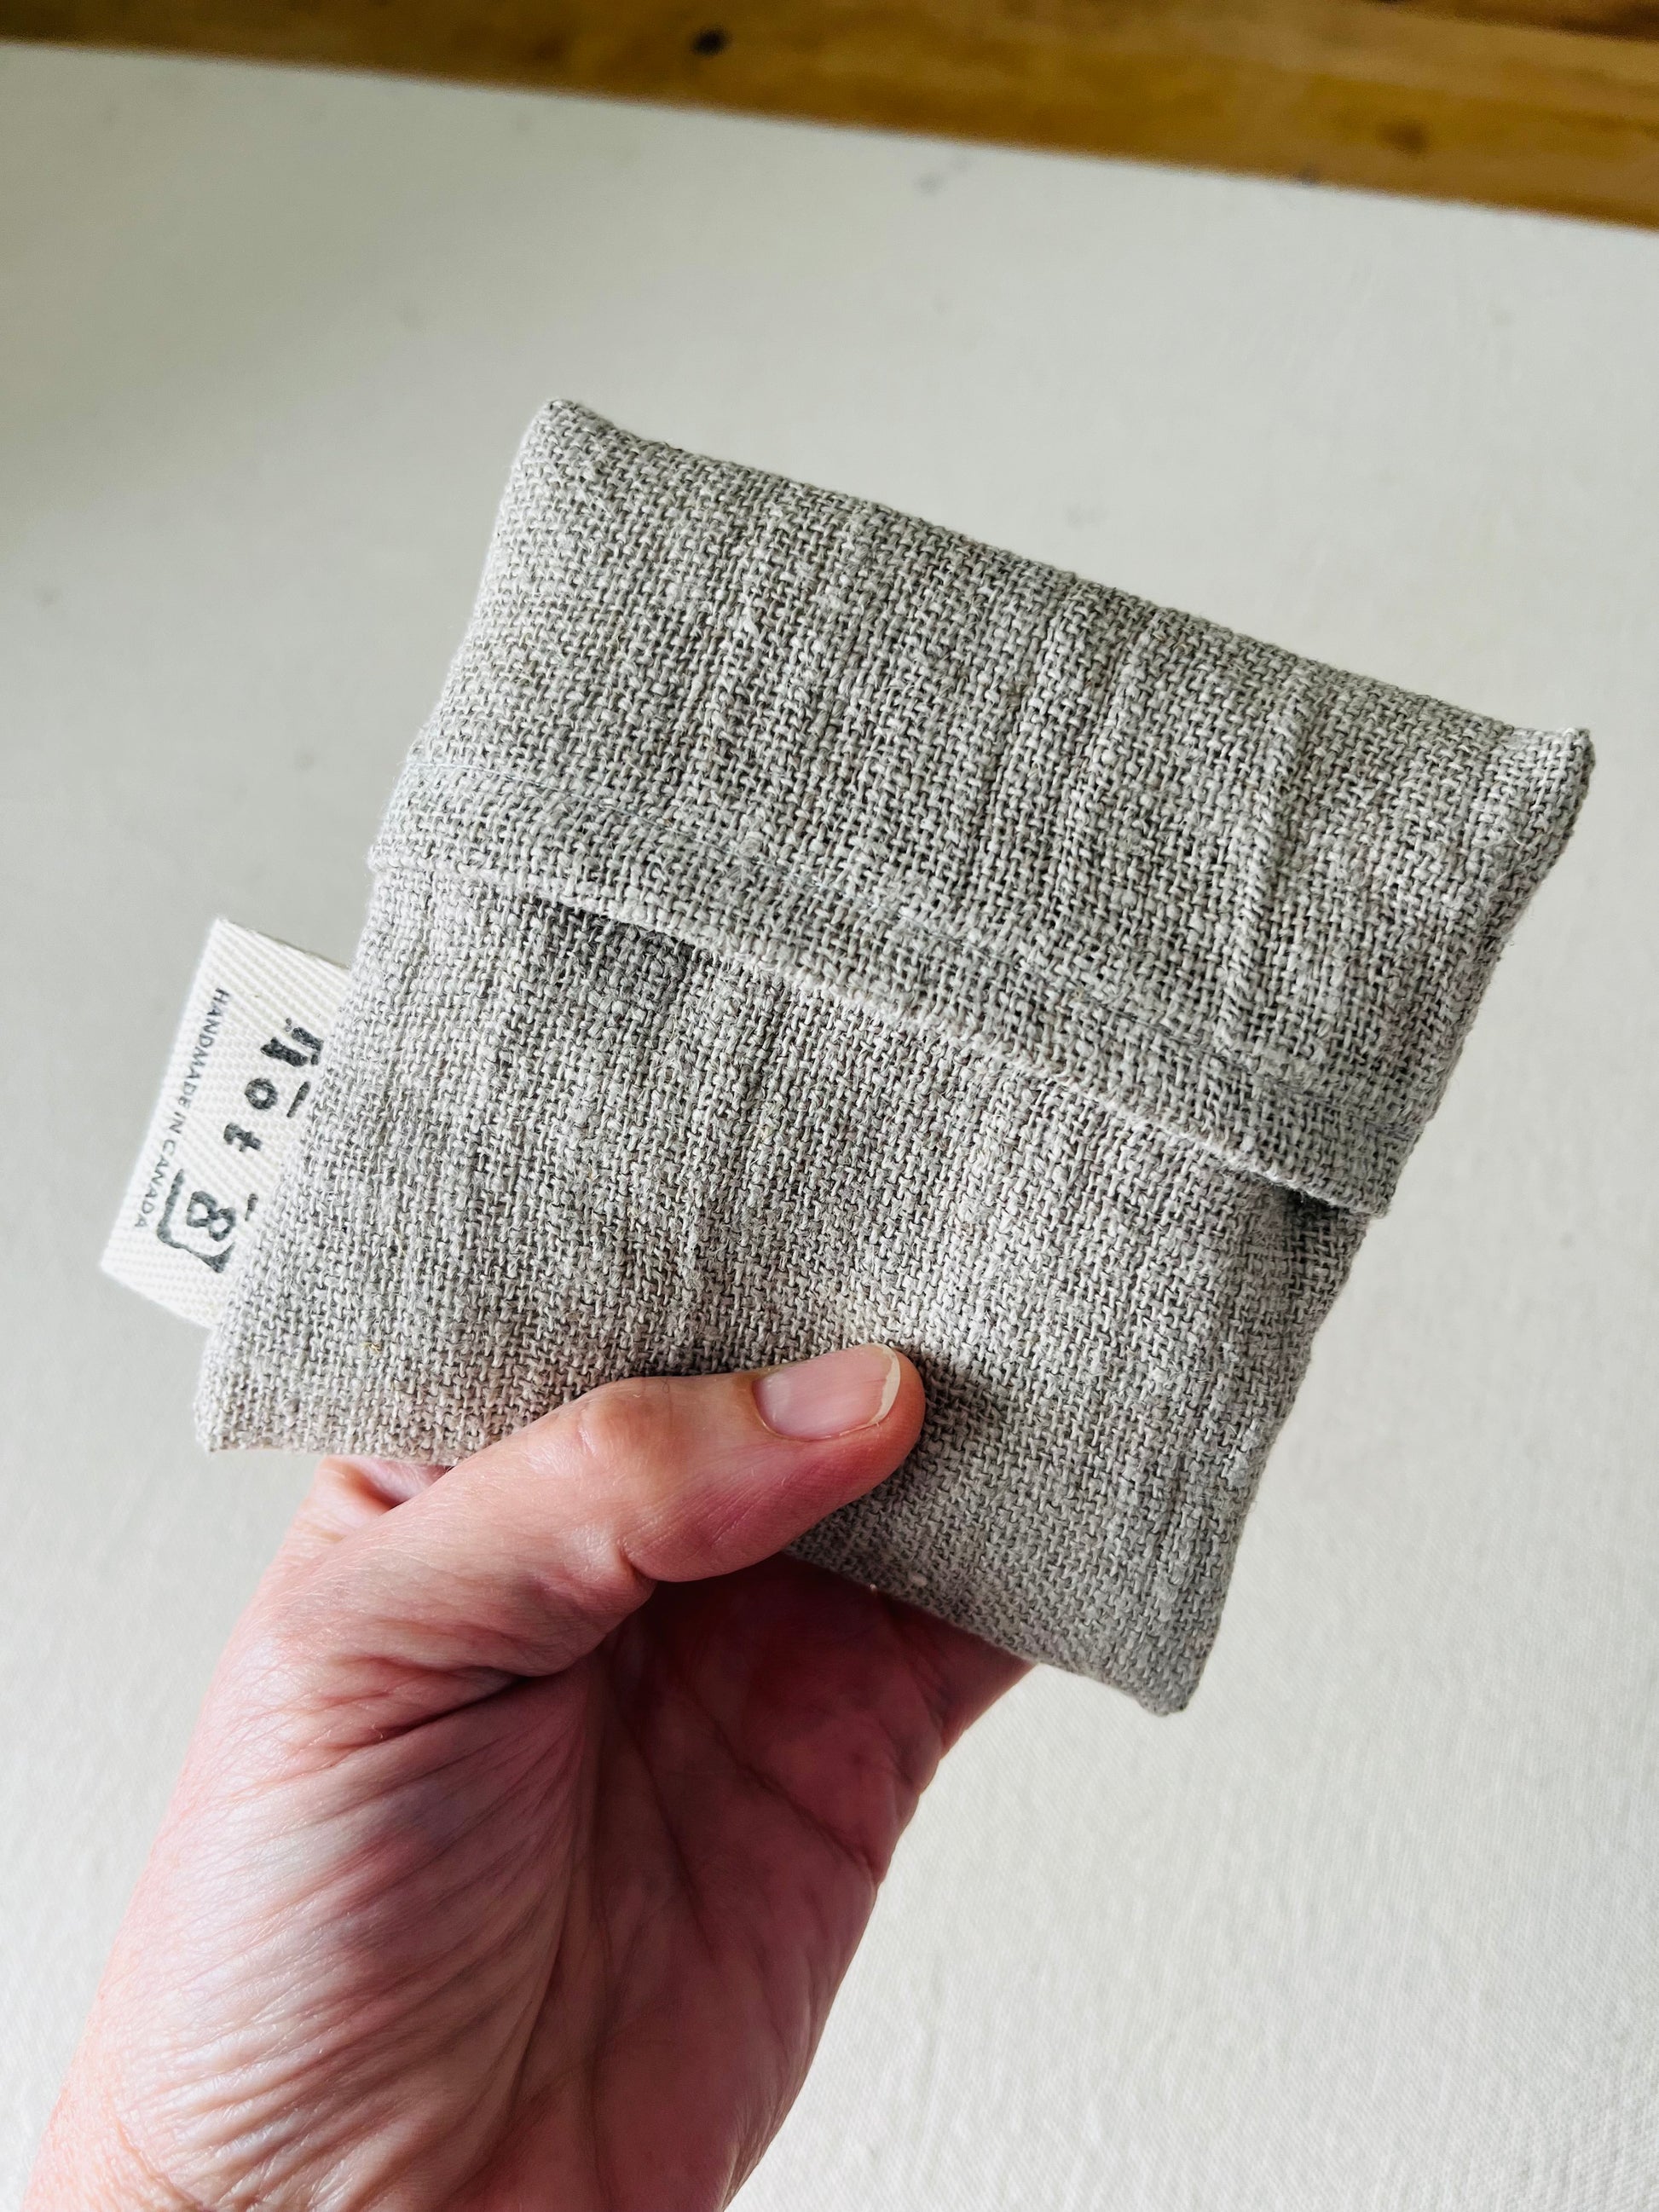 An adult hand holds up the Boo Boo Bag. The open weave of the natural linen and the cotton twill lot8 tag go hand in hand with this natural product.